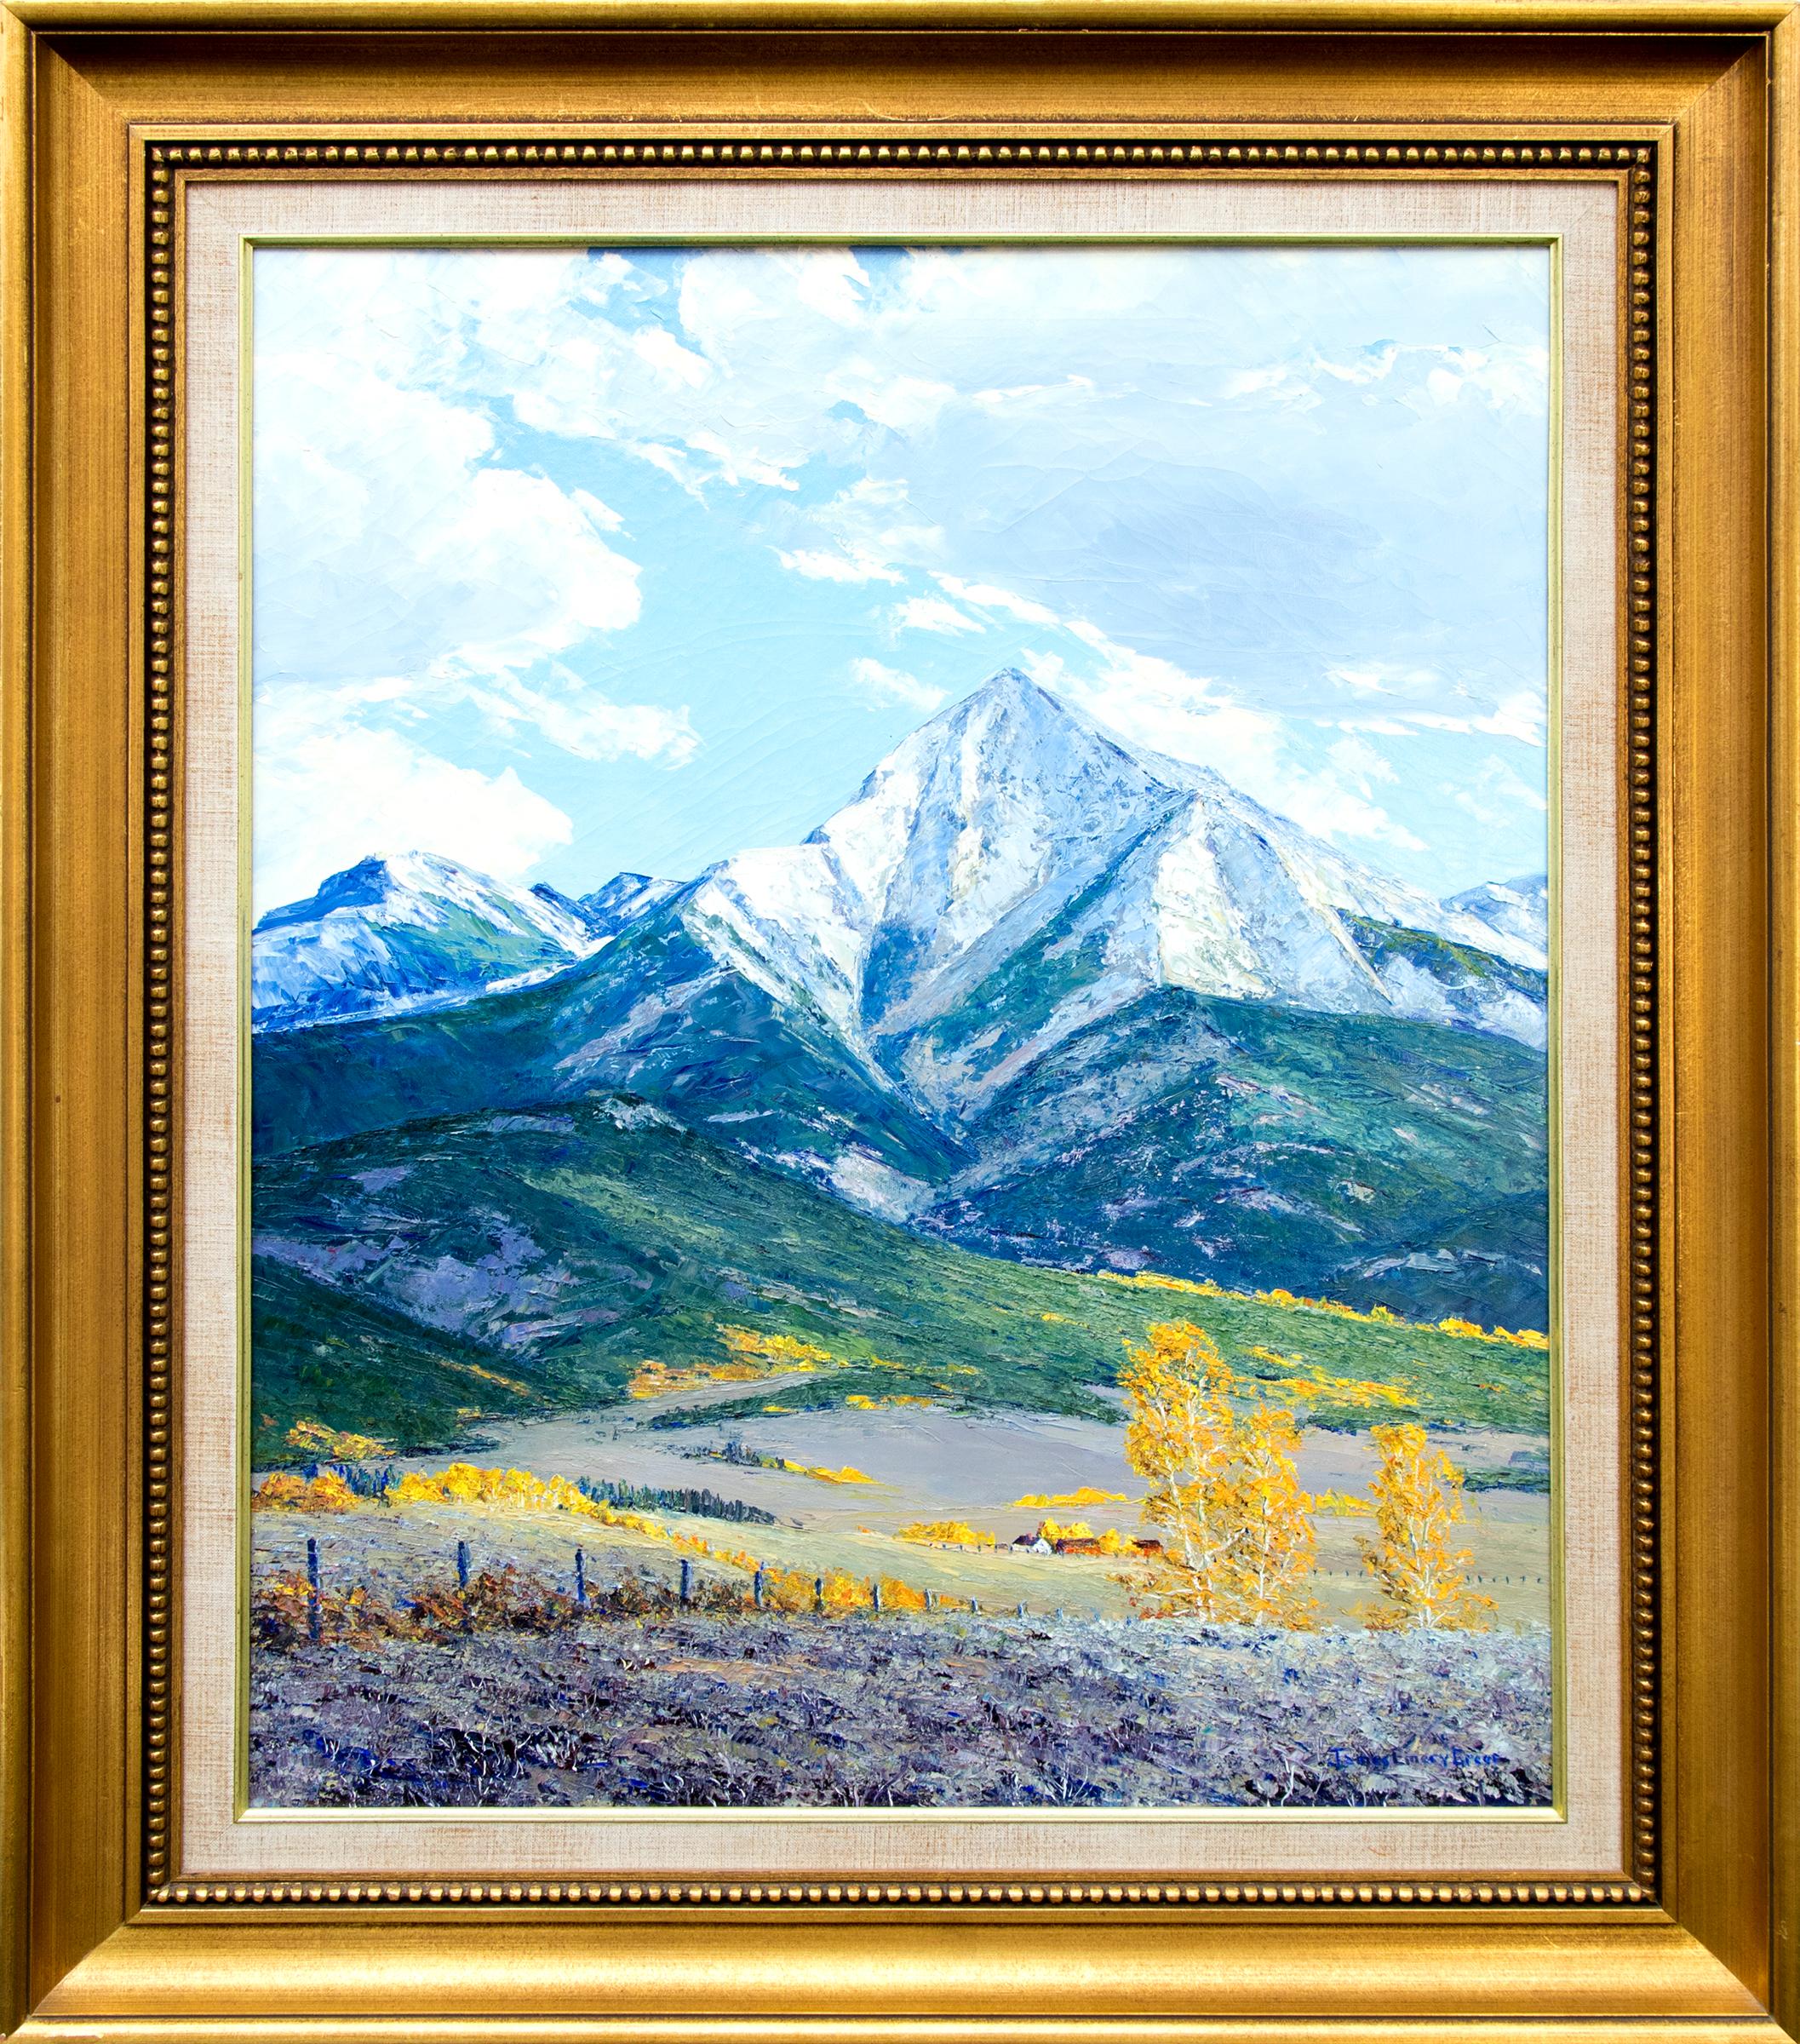 James Emery Greer Landscape Painting - Autumn Comes to Wet Mountain Valley, Colorado Landscape, Snow, Blue Green Yellow